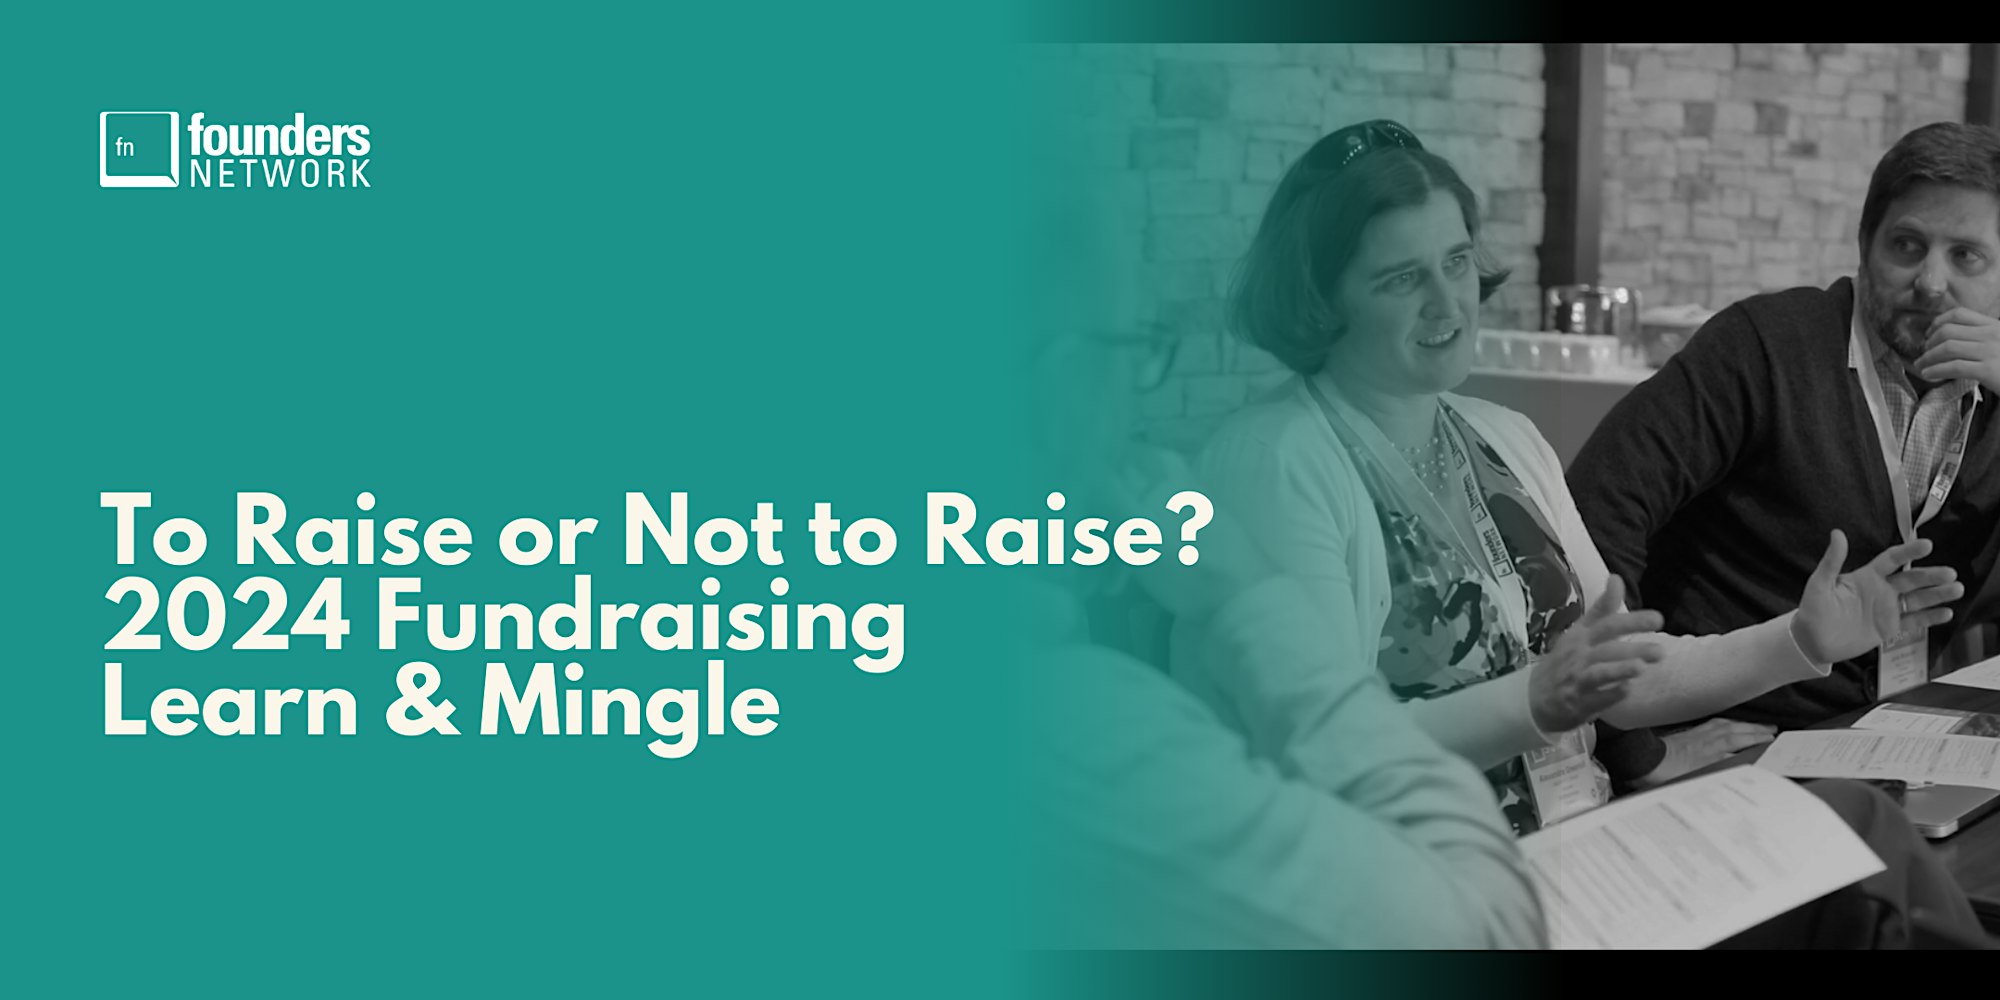 Featured image for “To Raise or Not to Raise? 2024 Fundraising Learn & Mingle”